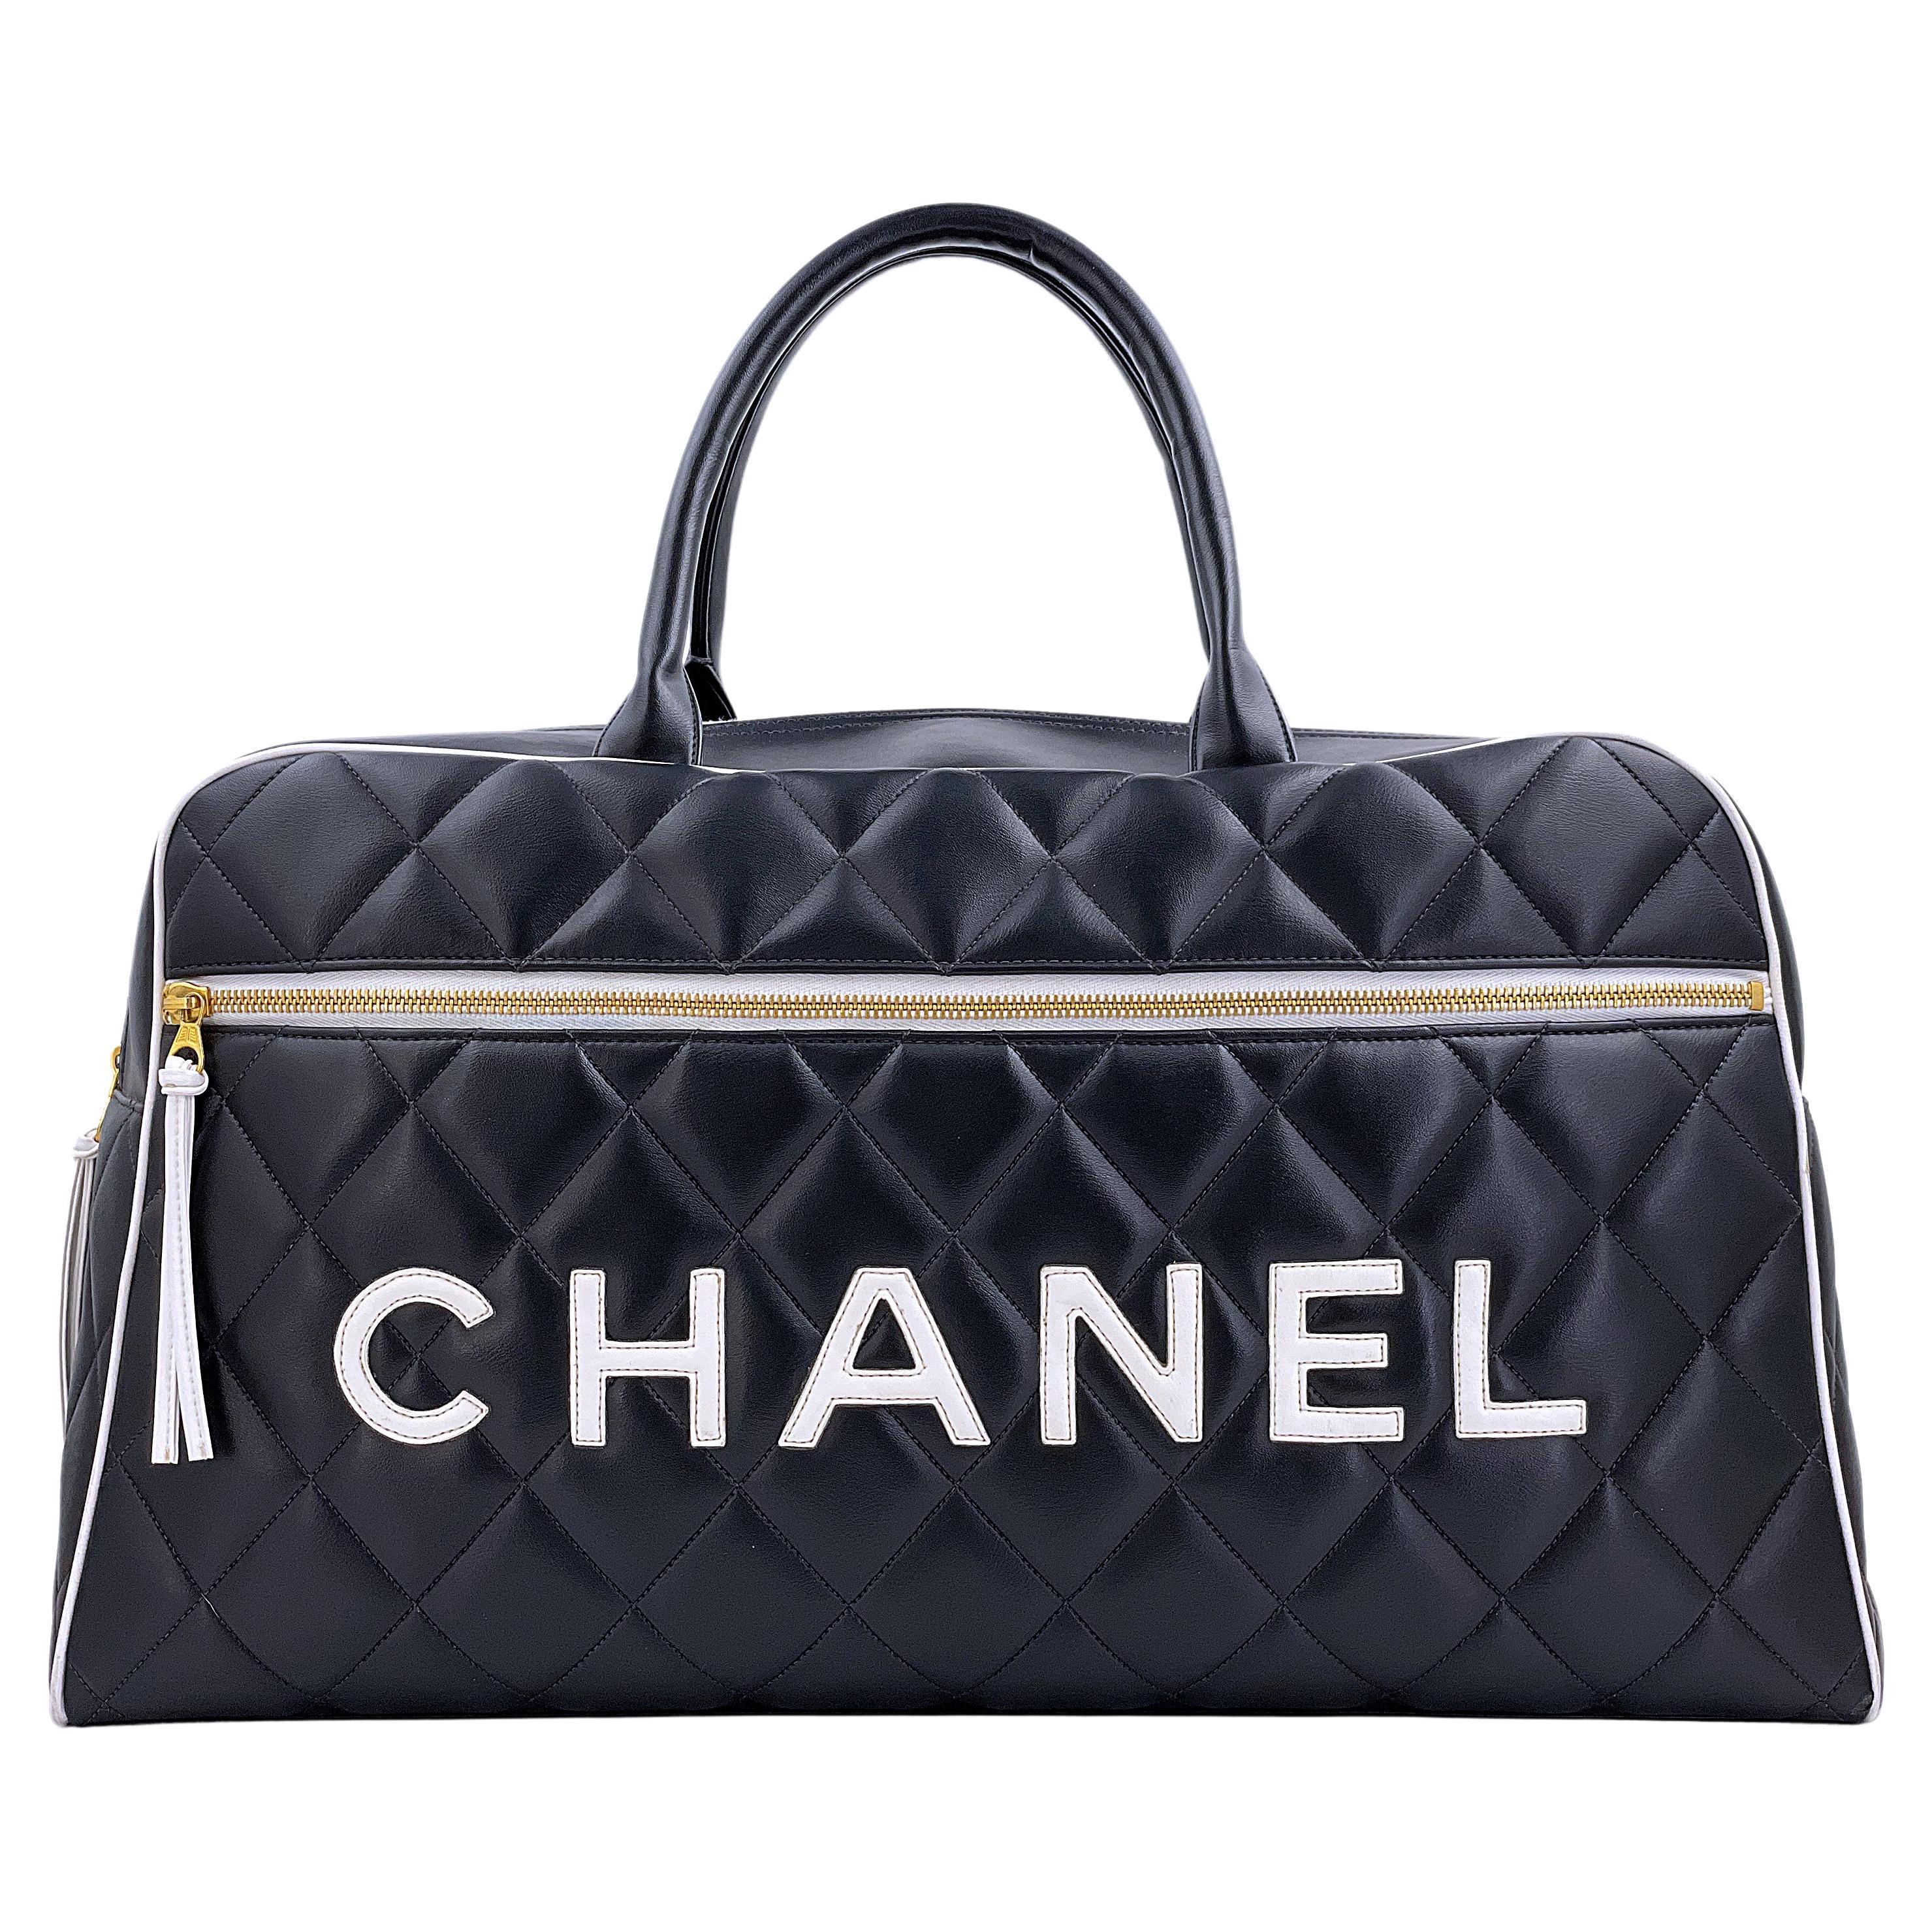 What is Chanel known for?